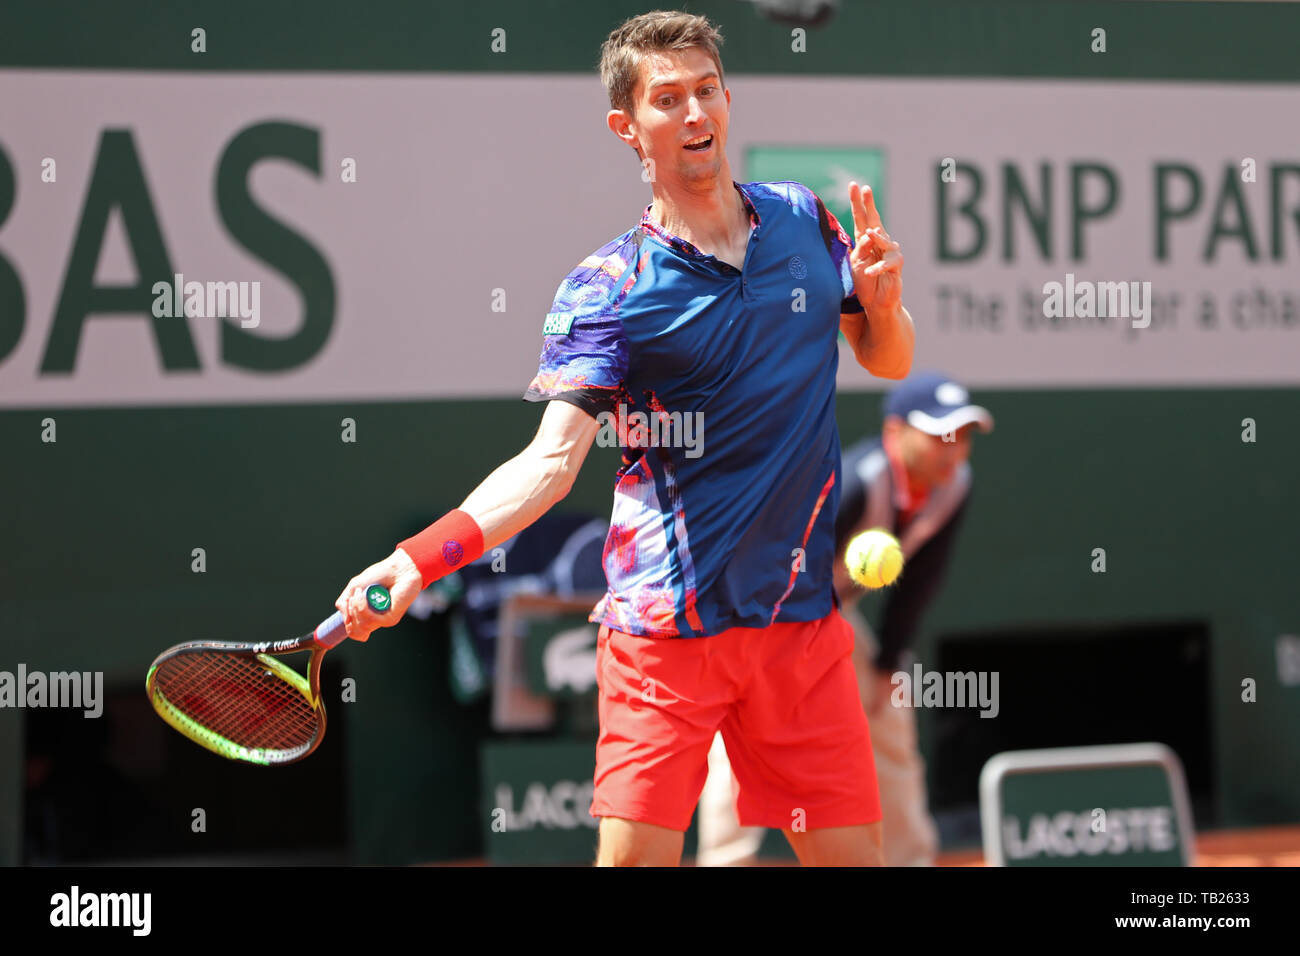 Paris, France. 29th May, 2019. Paris, France 29th May. Yannick Madden (GER) plays against Rafael Nadal (ESP) during the French Open Tennis at Stade Roland-Garros, Paris on Wednesday 29th May 2019. (Credit: Jon Bromley | MI News) Credit: MI News & Sport /Alamy Live News Stock Photo